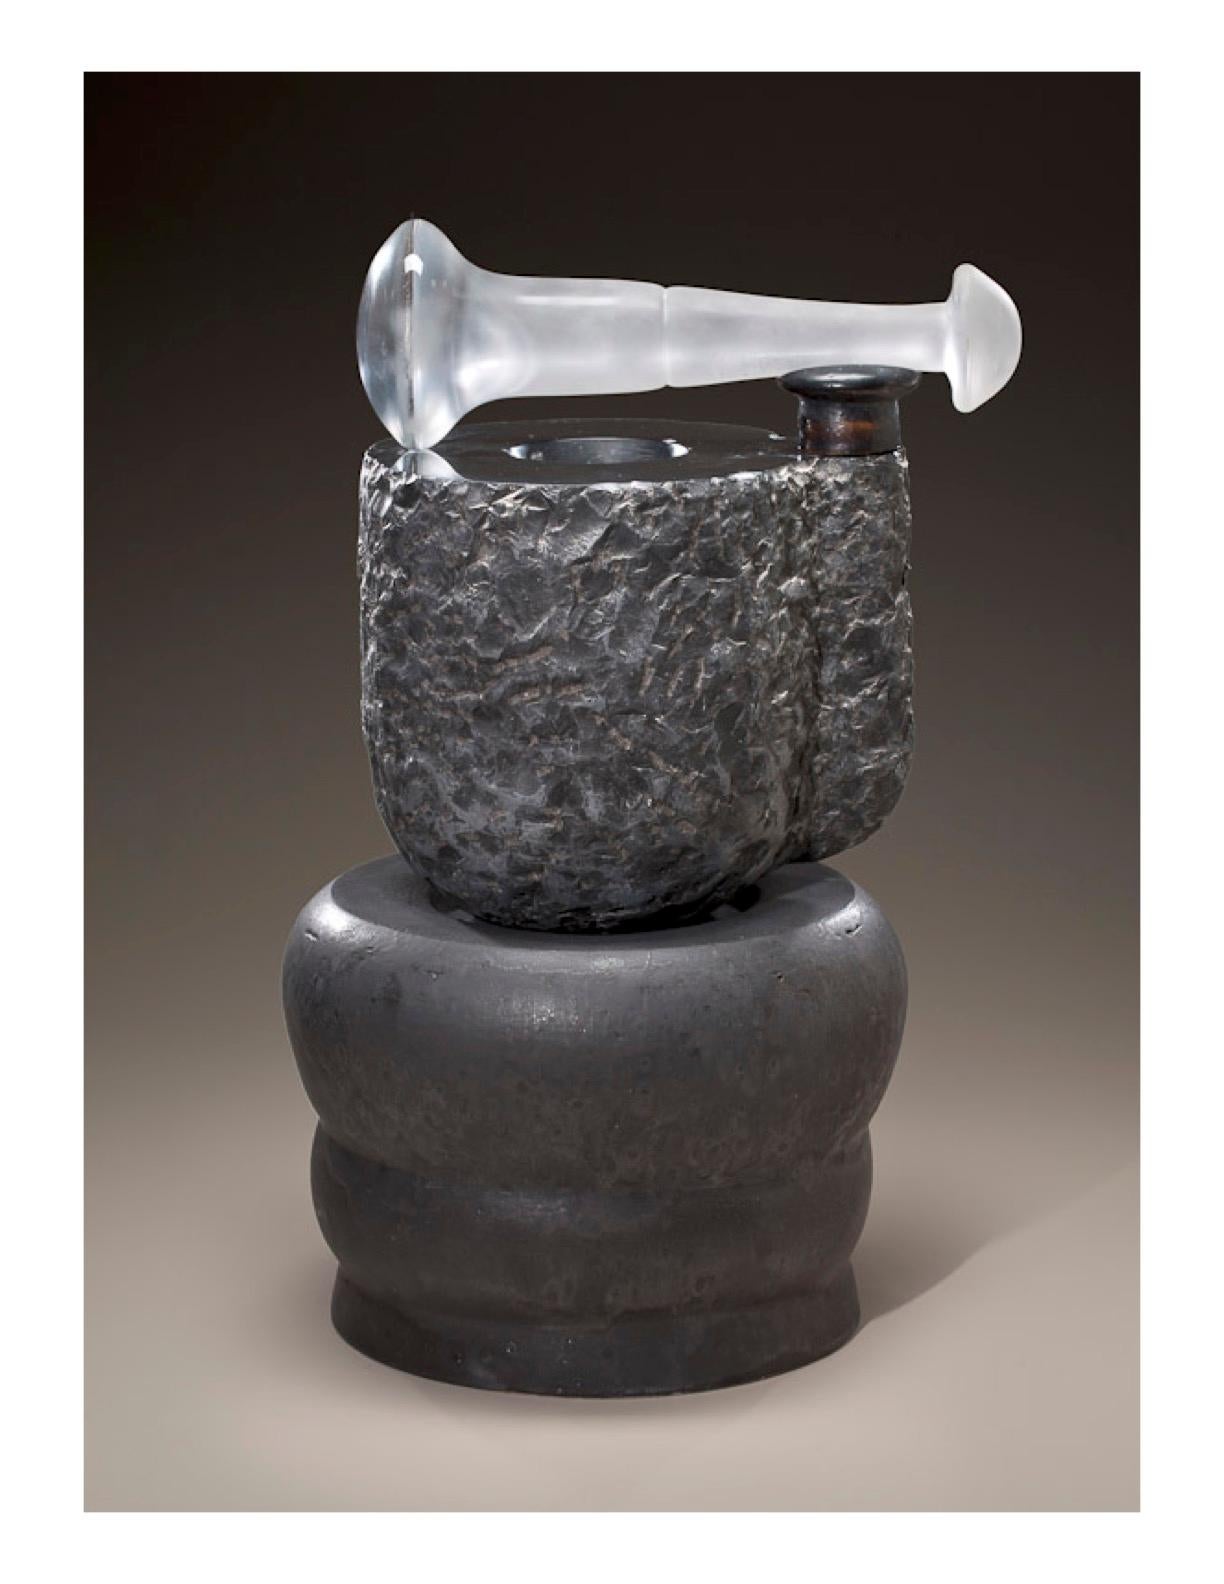 Contemporary Richard Hirsch Black Marble Mortar and Glass Pestle Sculpture, 2006 - 2010 For Sale